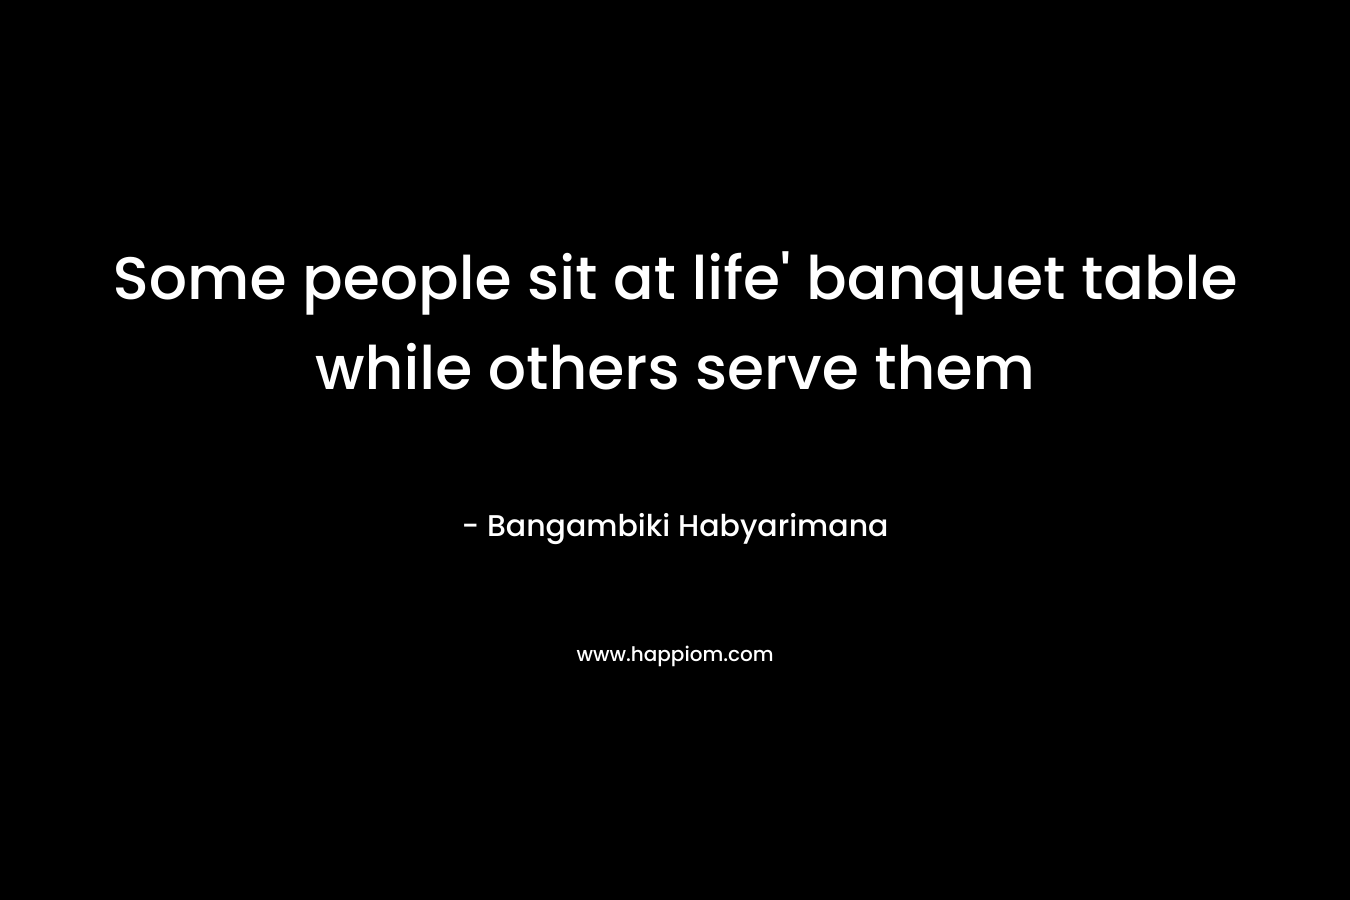 Some people sit at life' banquet table while others serve them